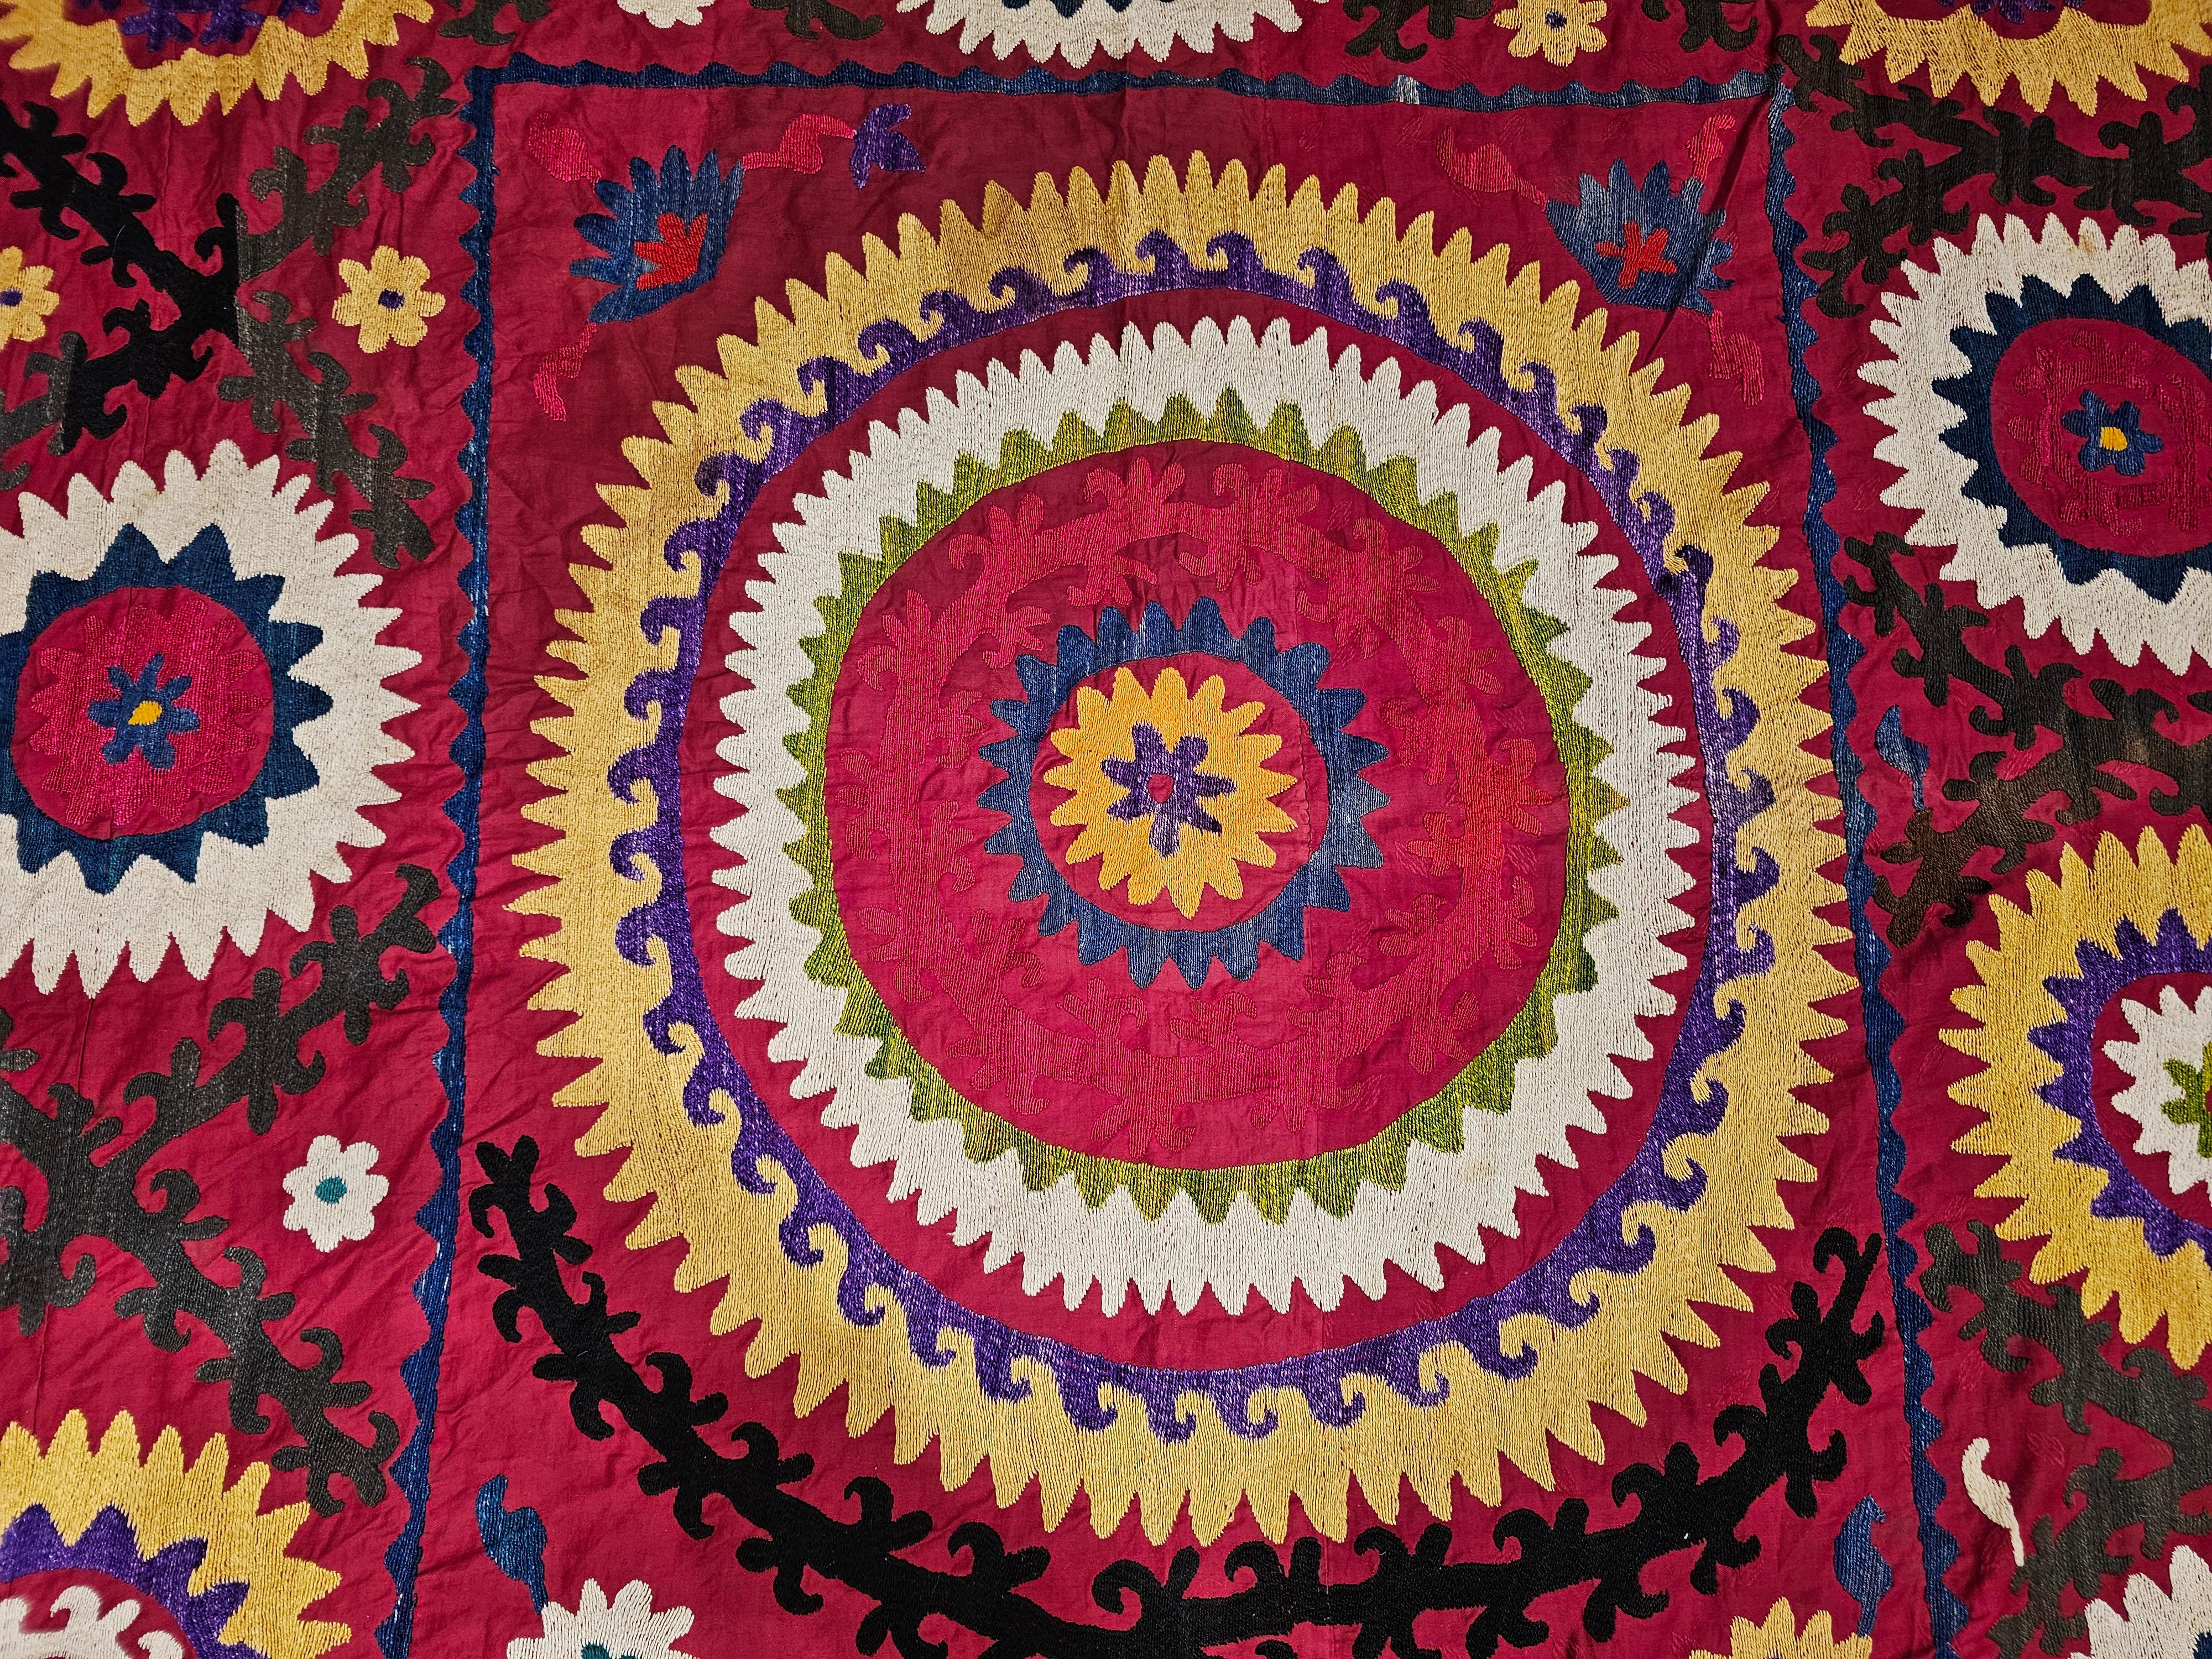 Vintage Uzbek Suzani Silk Embroidery in Crimson Red, Ivory, Blue, Yellow, Black For Sale 3